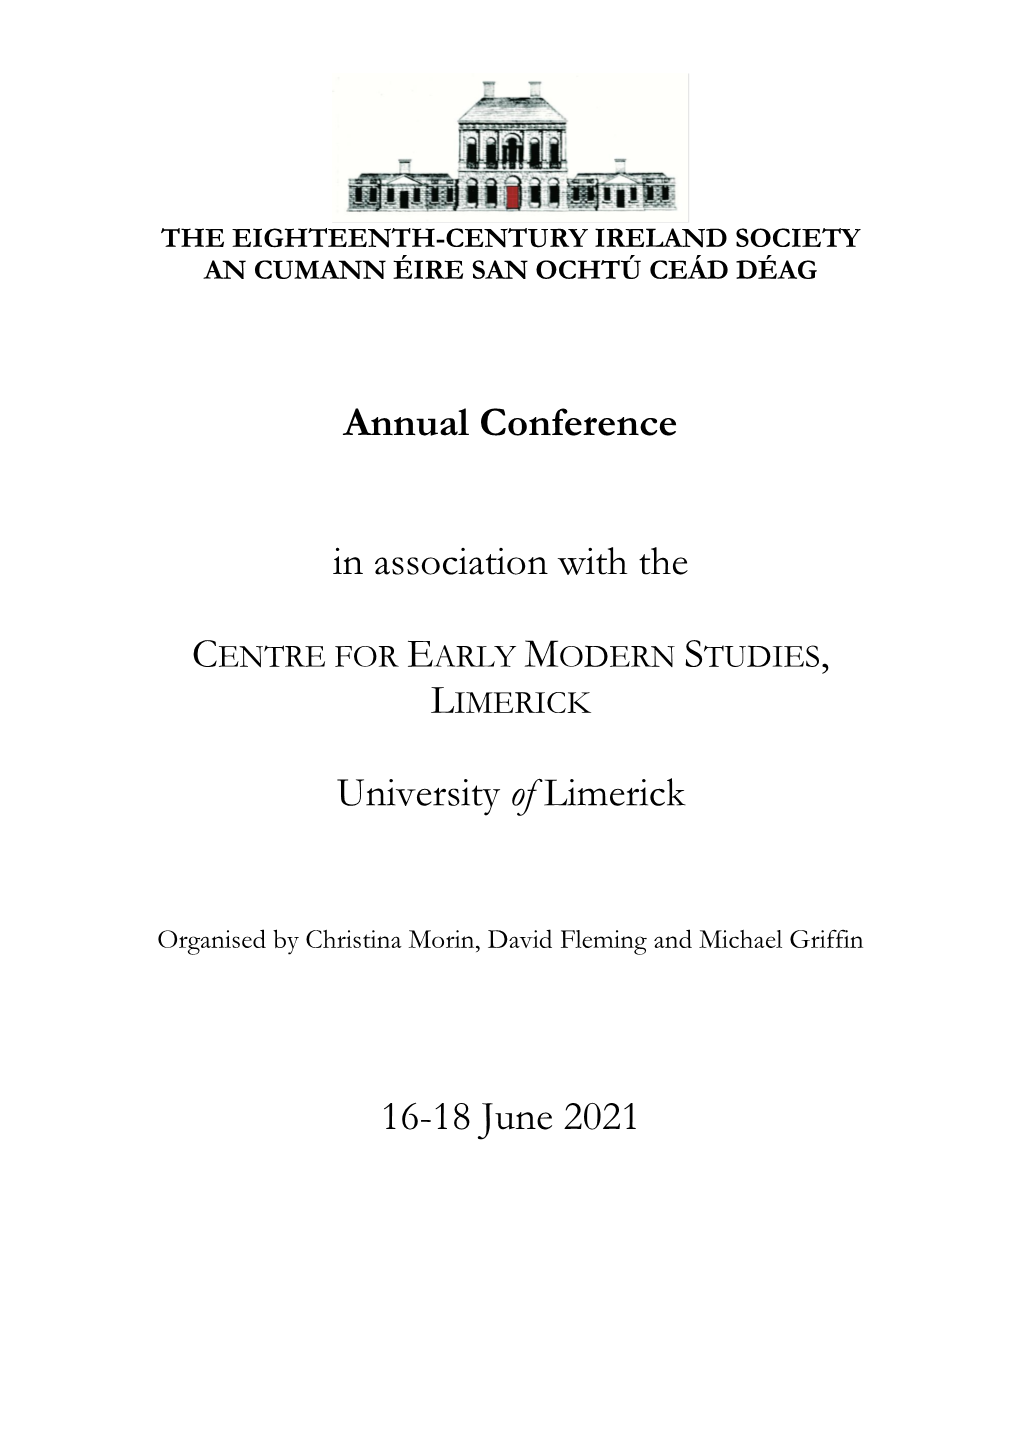 Follow This Link to Download the Conference Programme, Which